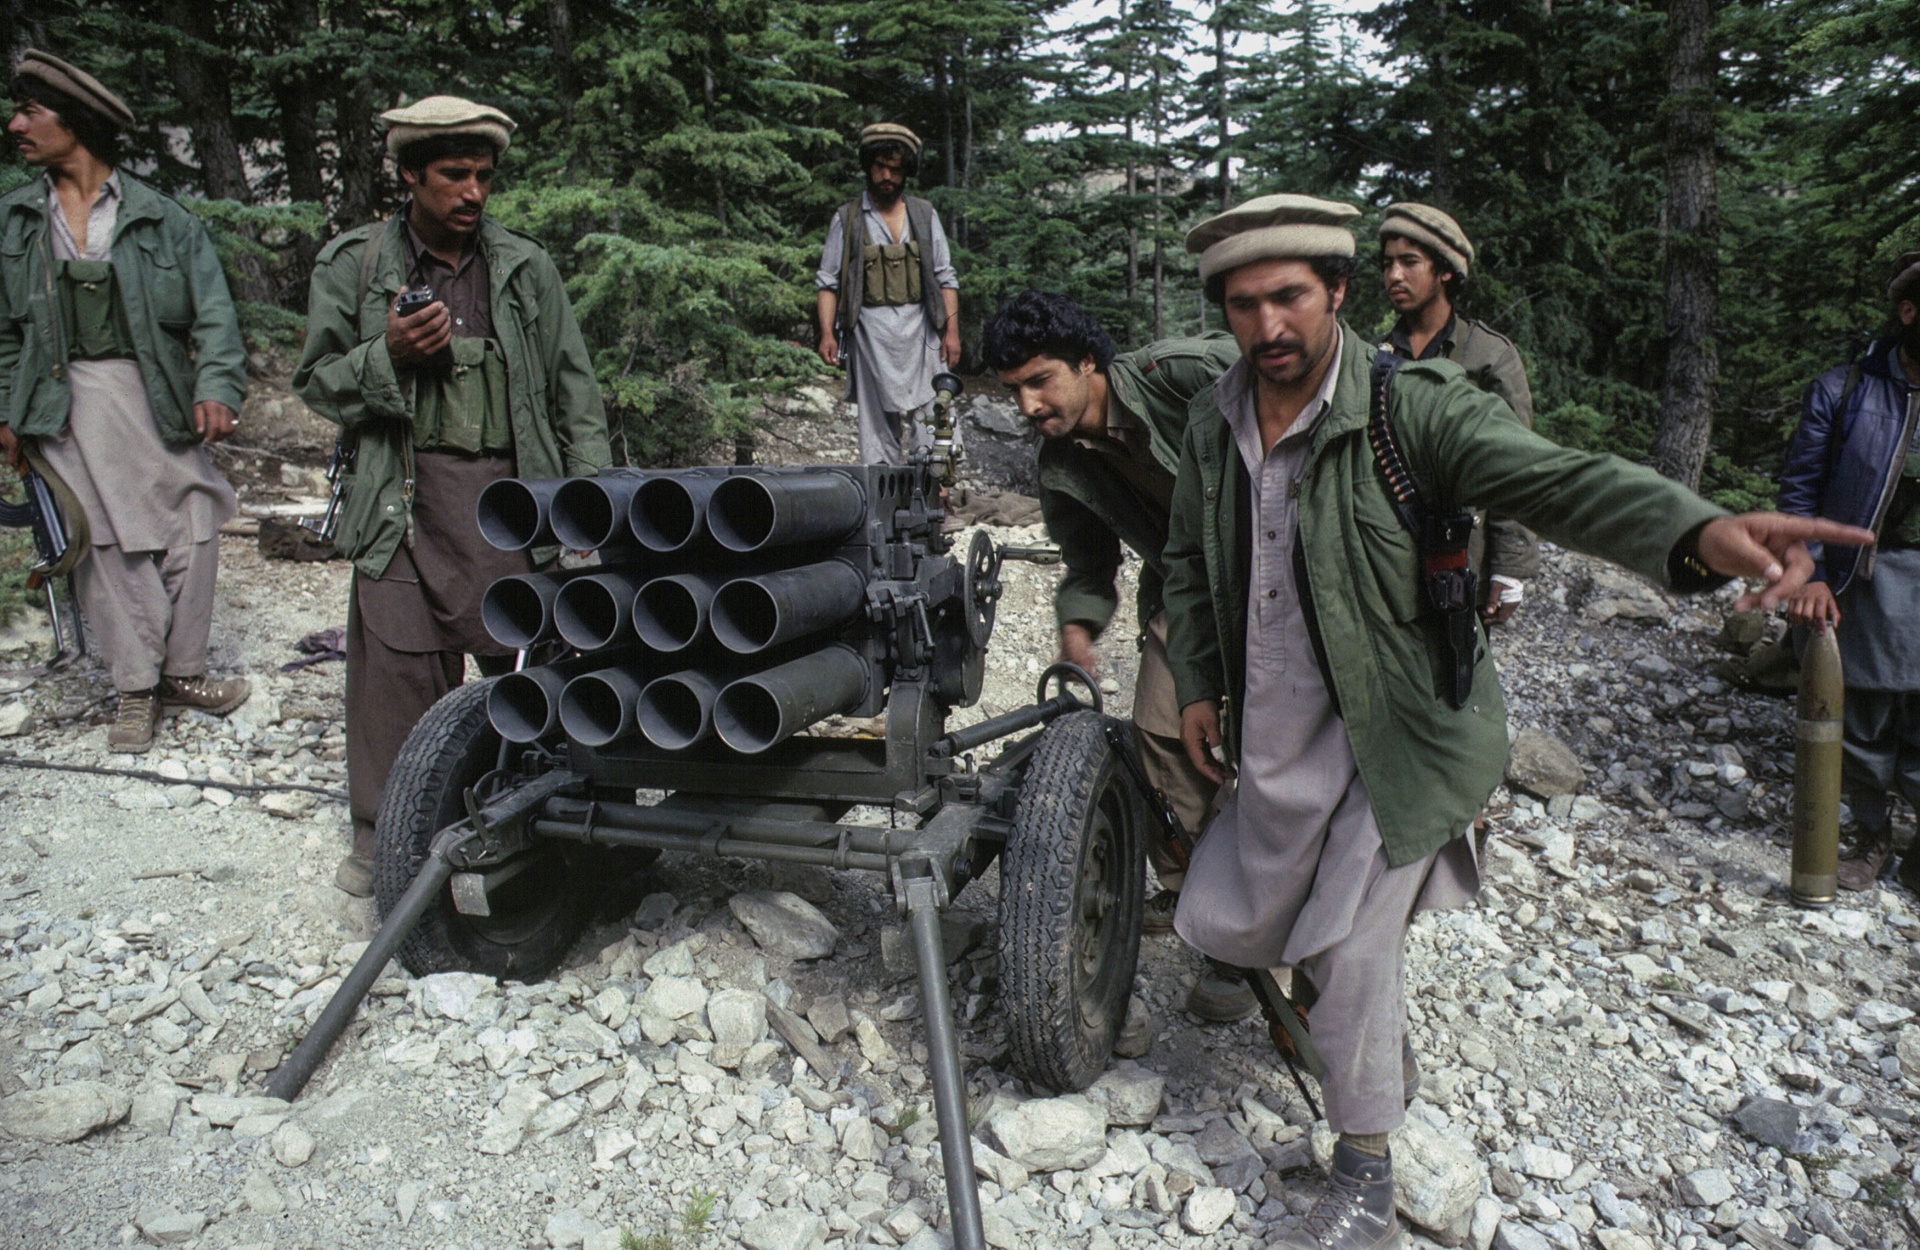 AFGHANISTAN  "Mujahideen in Kabul Province 1986"  © Paolo Siccardi, © Paolo Siccardi - All rights reserved - Tutti i diritti sono riservati. siccardi.walkaboutph@gmail.com © Copyright 2020 - tutti i diritti sono riservati - all rights reserved. art. 70